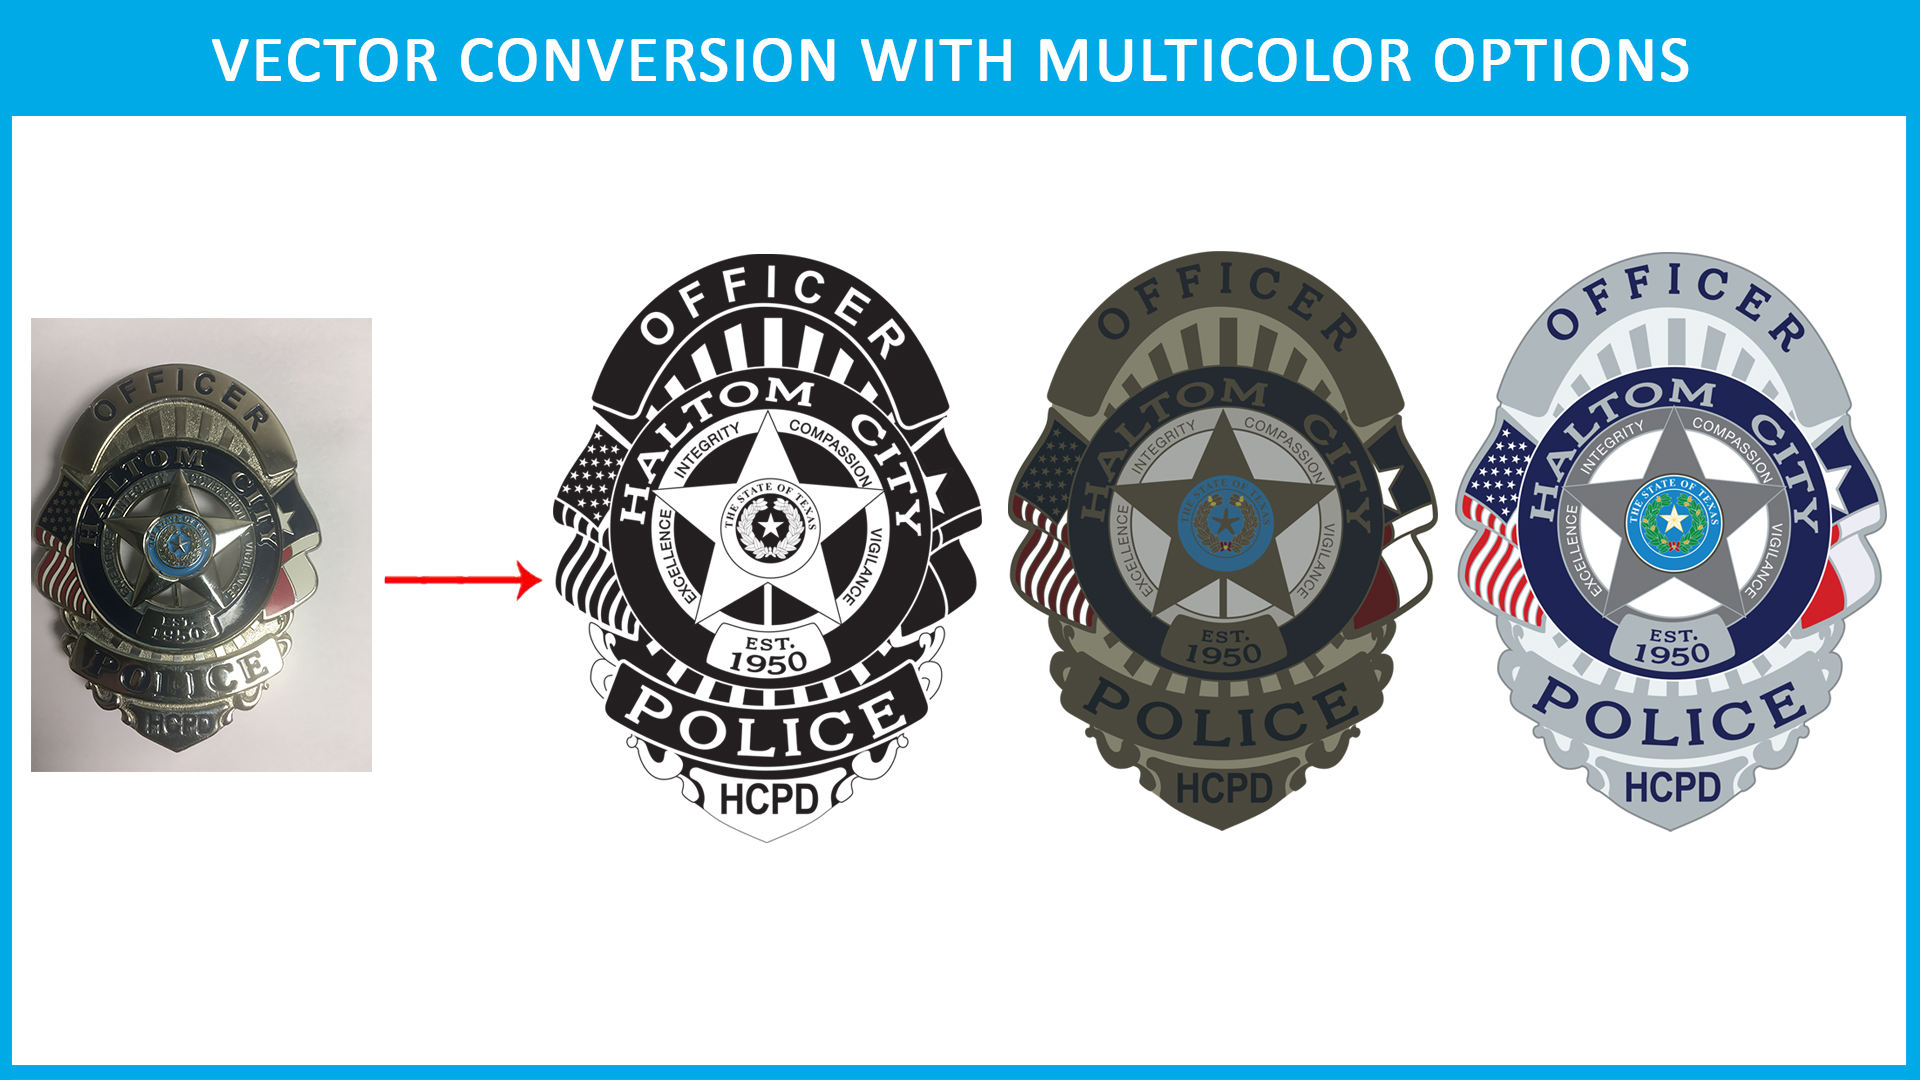 VECTOR CONVERSION WITH MULTICOLOR OPTIONS